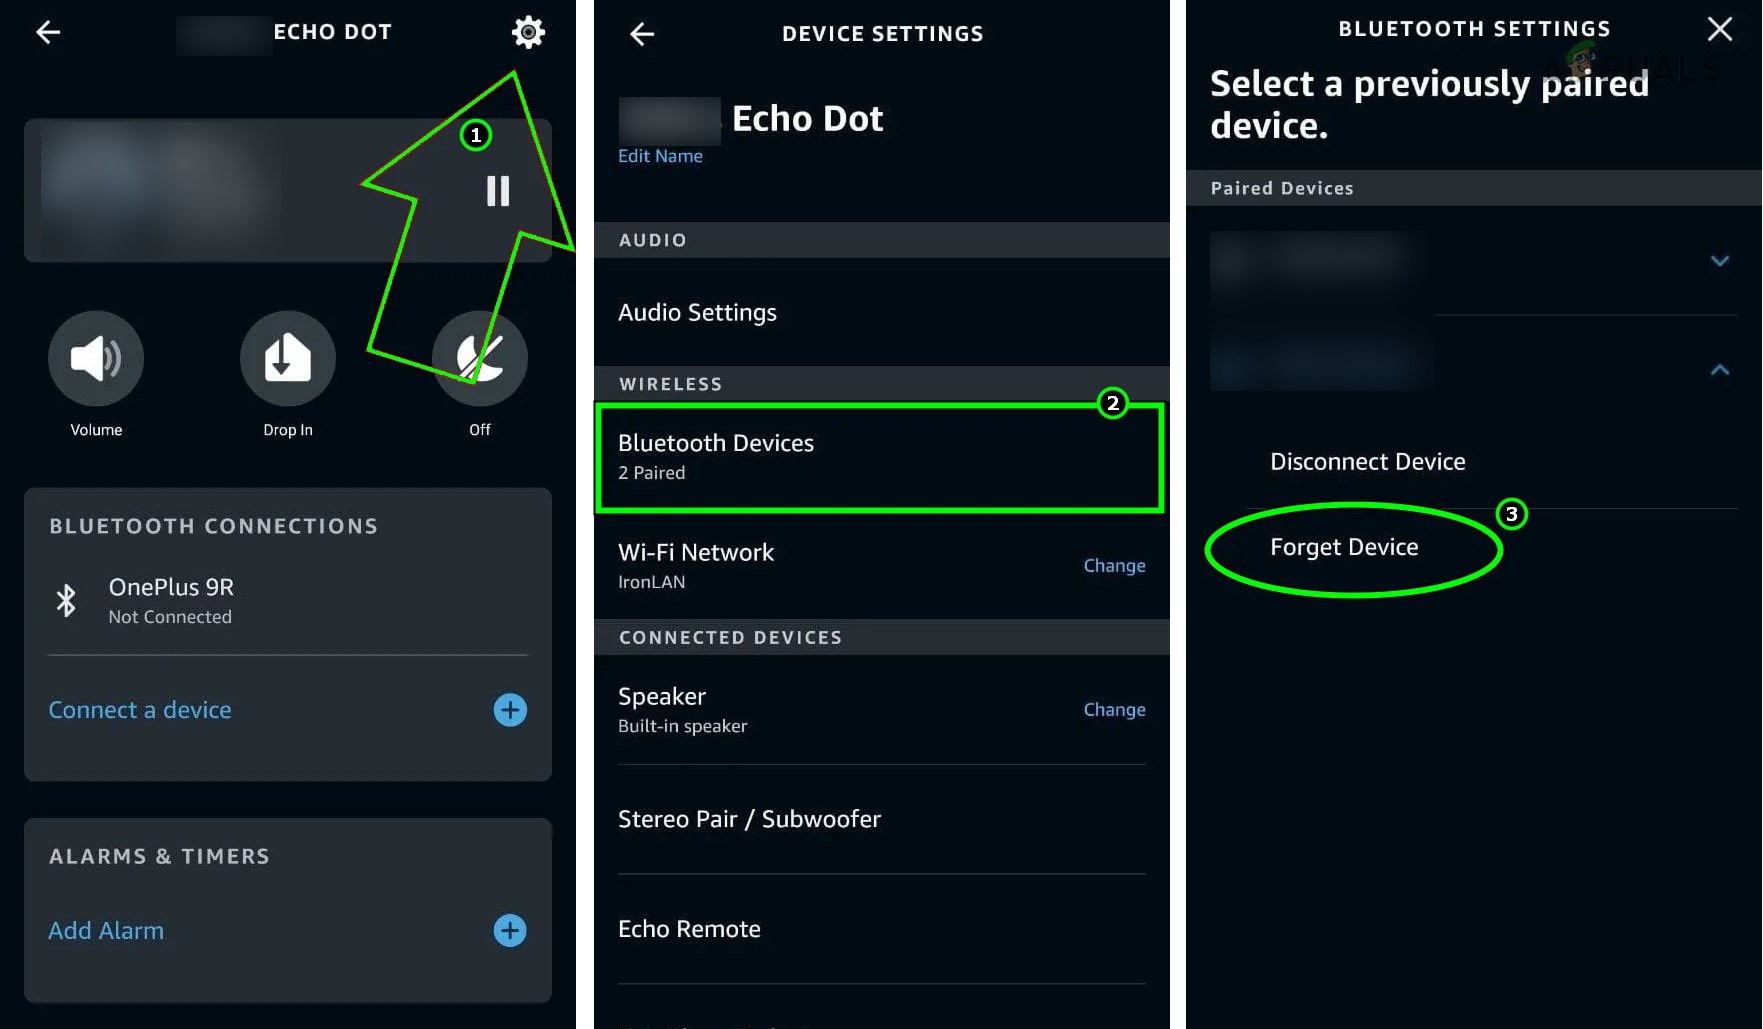 Forget the Device in the Alexa App's Bluetooth Settings